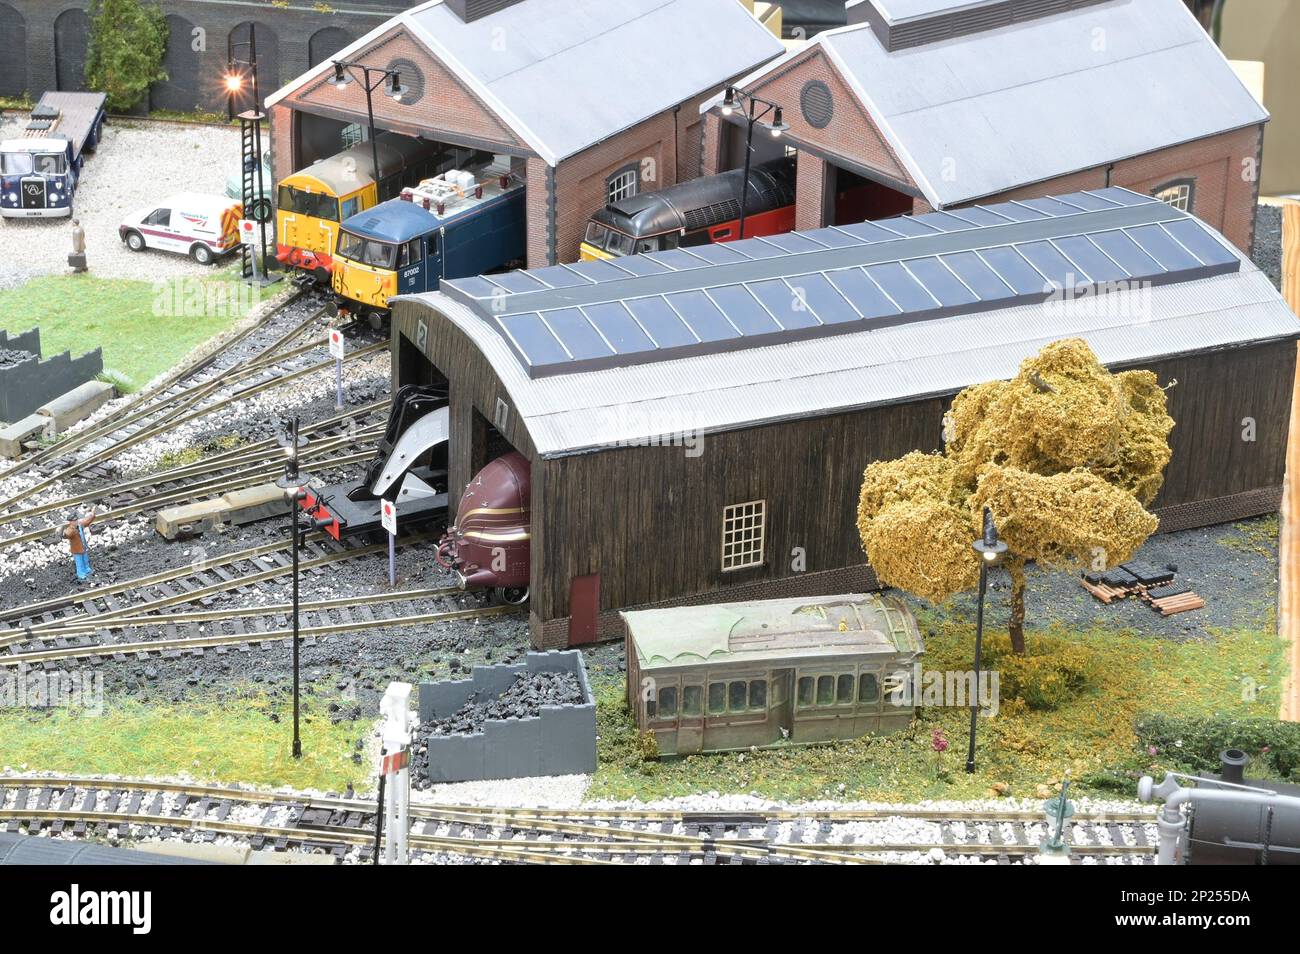 Engine sheds on a model railway in a maintenance yard. Stock Photo